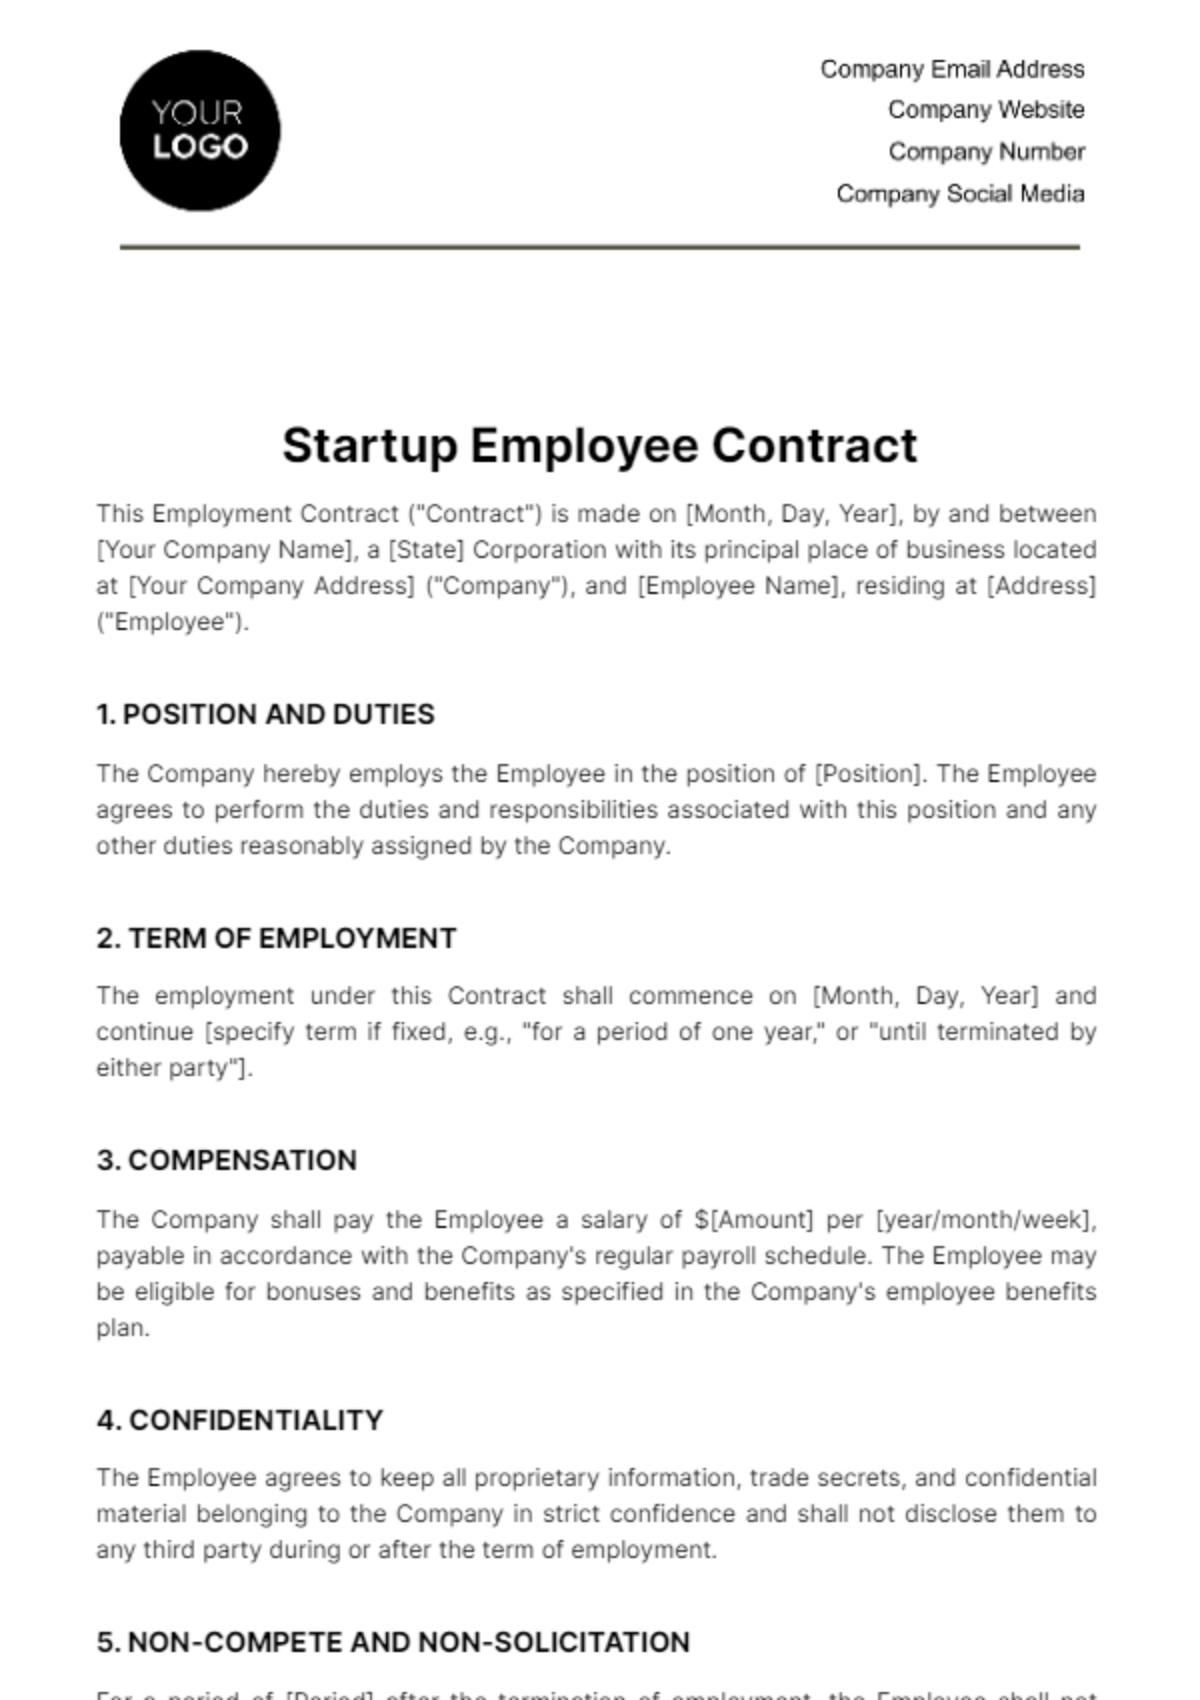 Startup Employee Contract Template